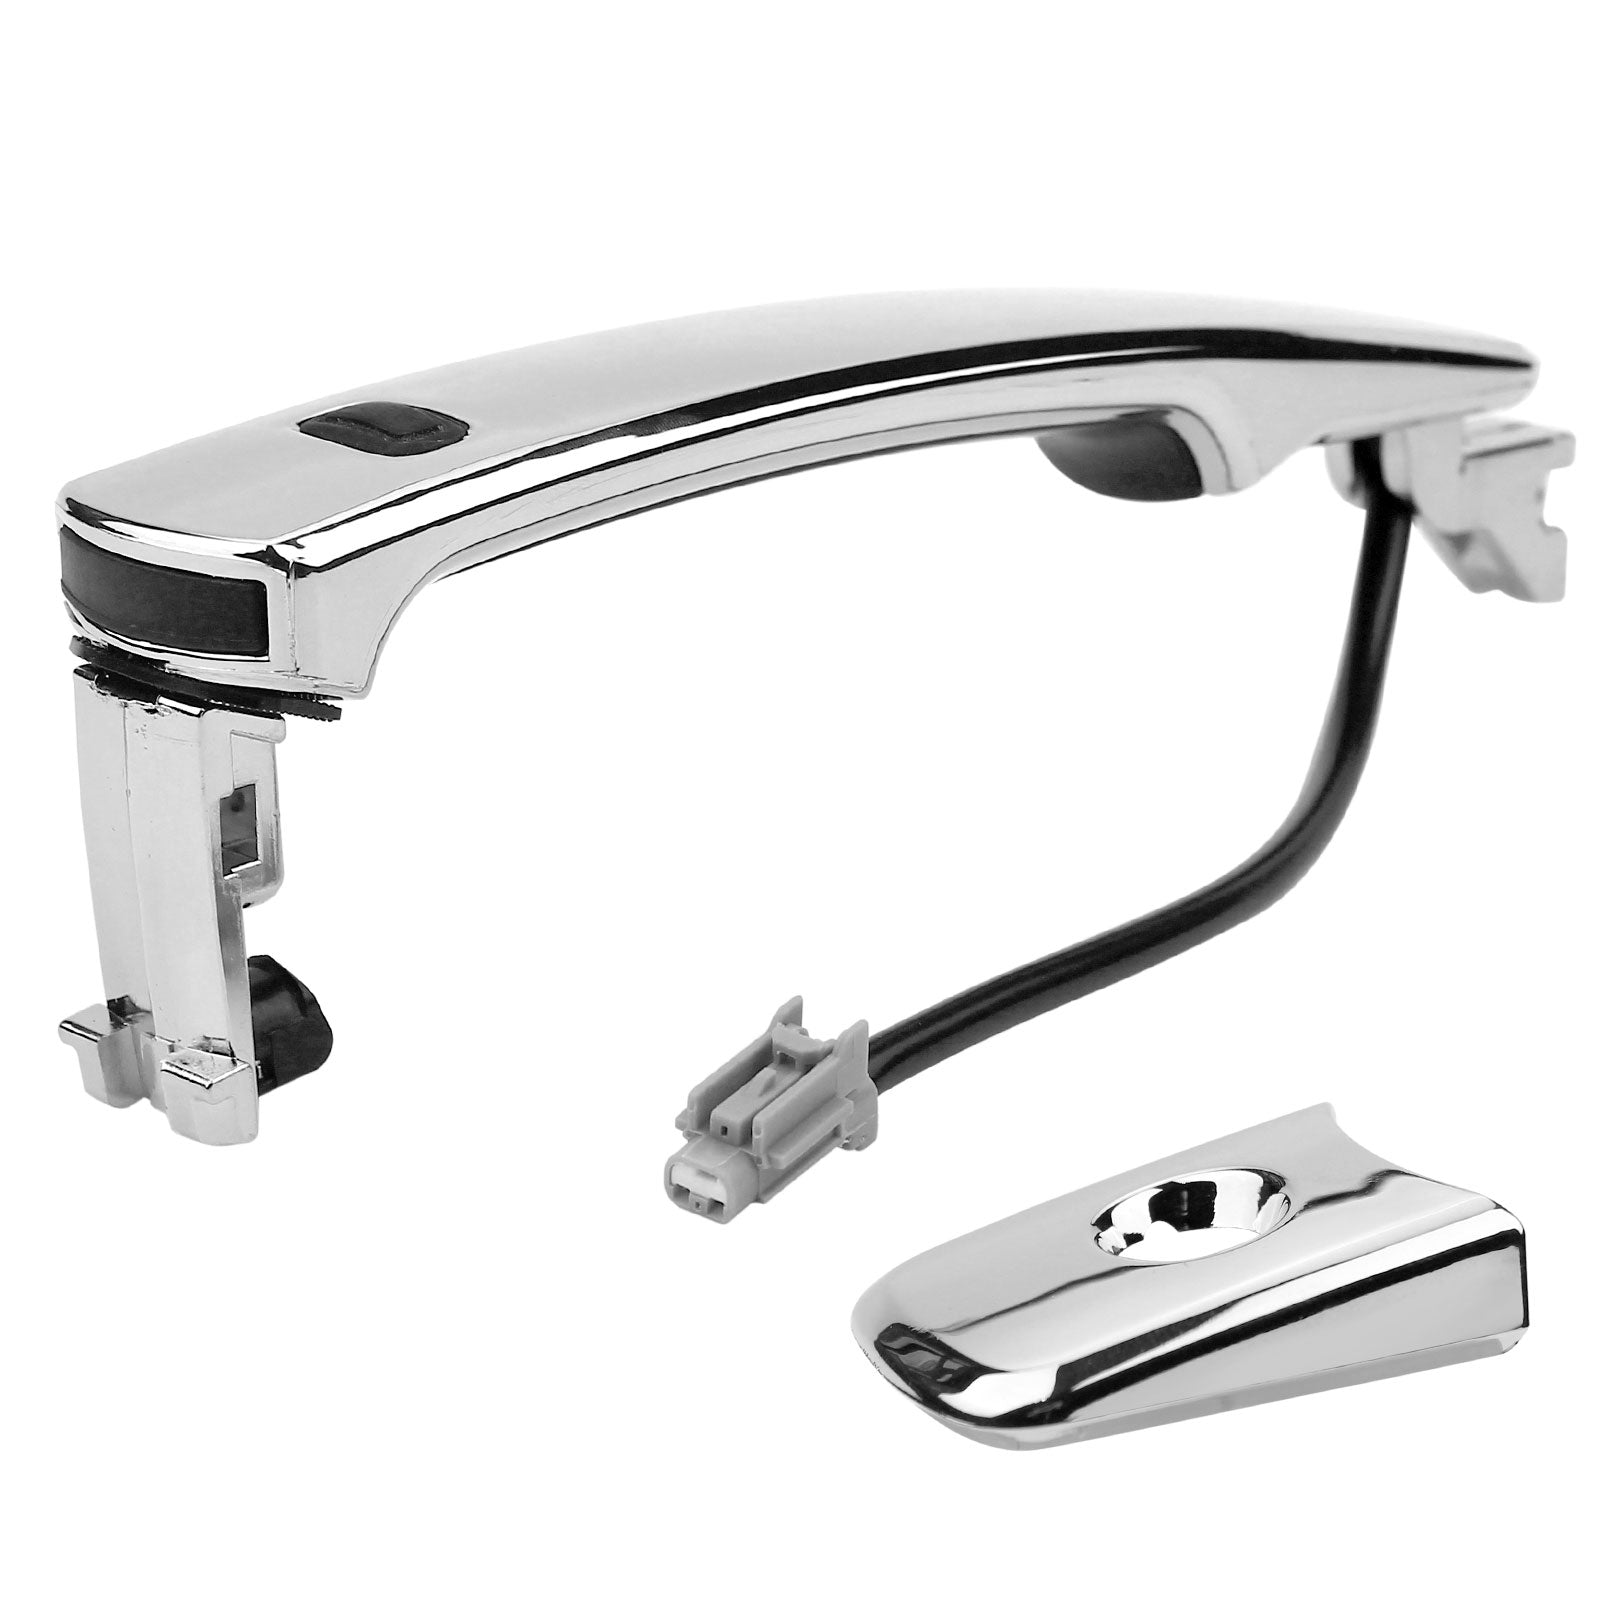 Front Left Exterior Door Handle Fits for Nissan Murano/Rogue/Rogue Select,Infiniti FX35/FX45/G35 Driver Side Outer Door Handles (Chrome Silver) MotorbyMotor